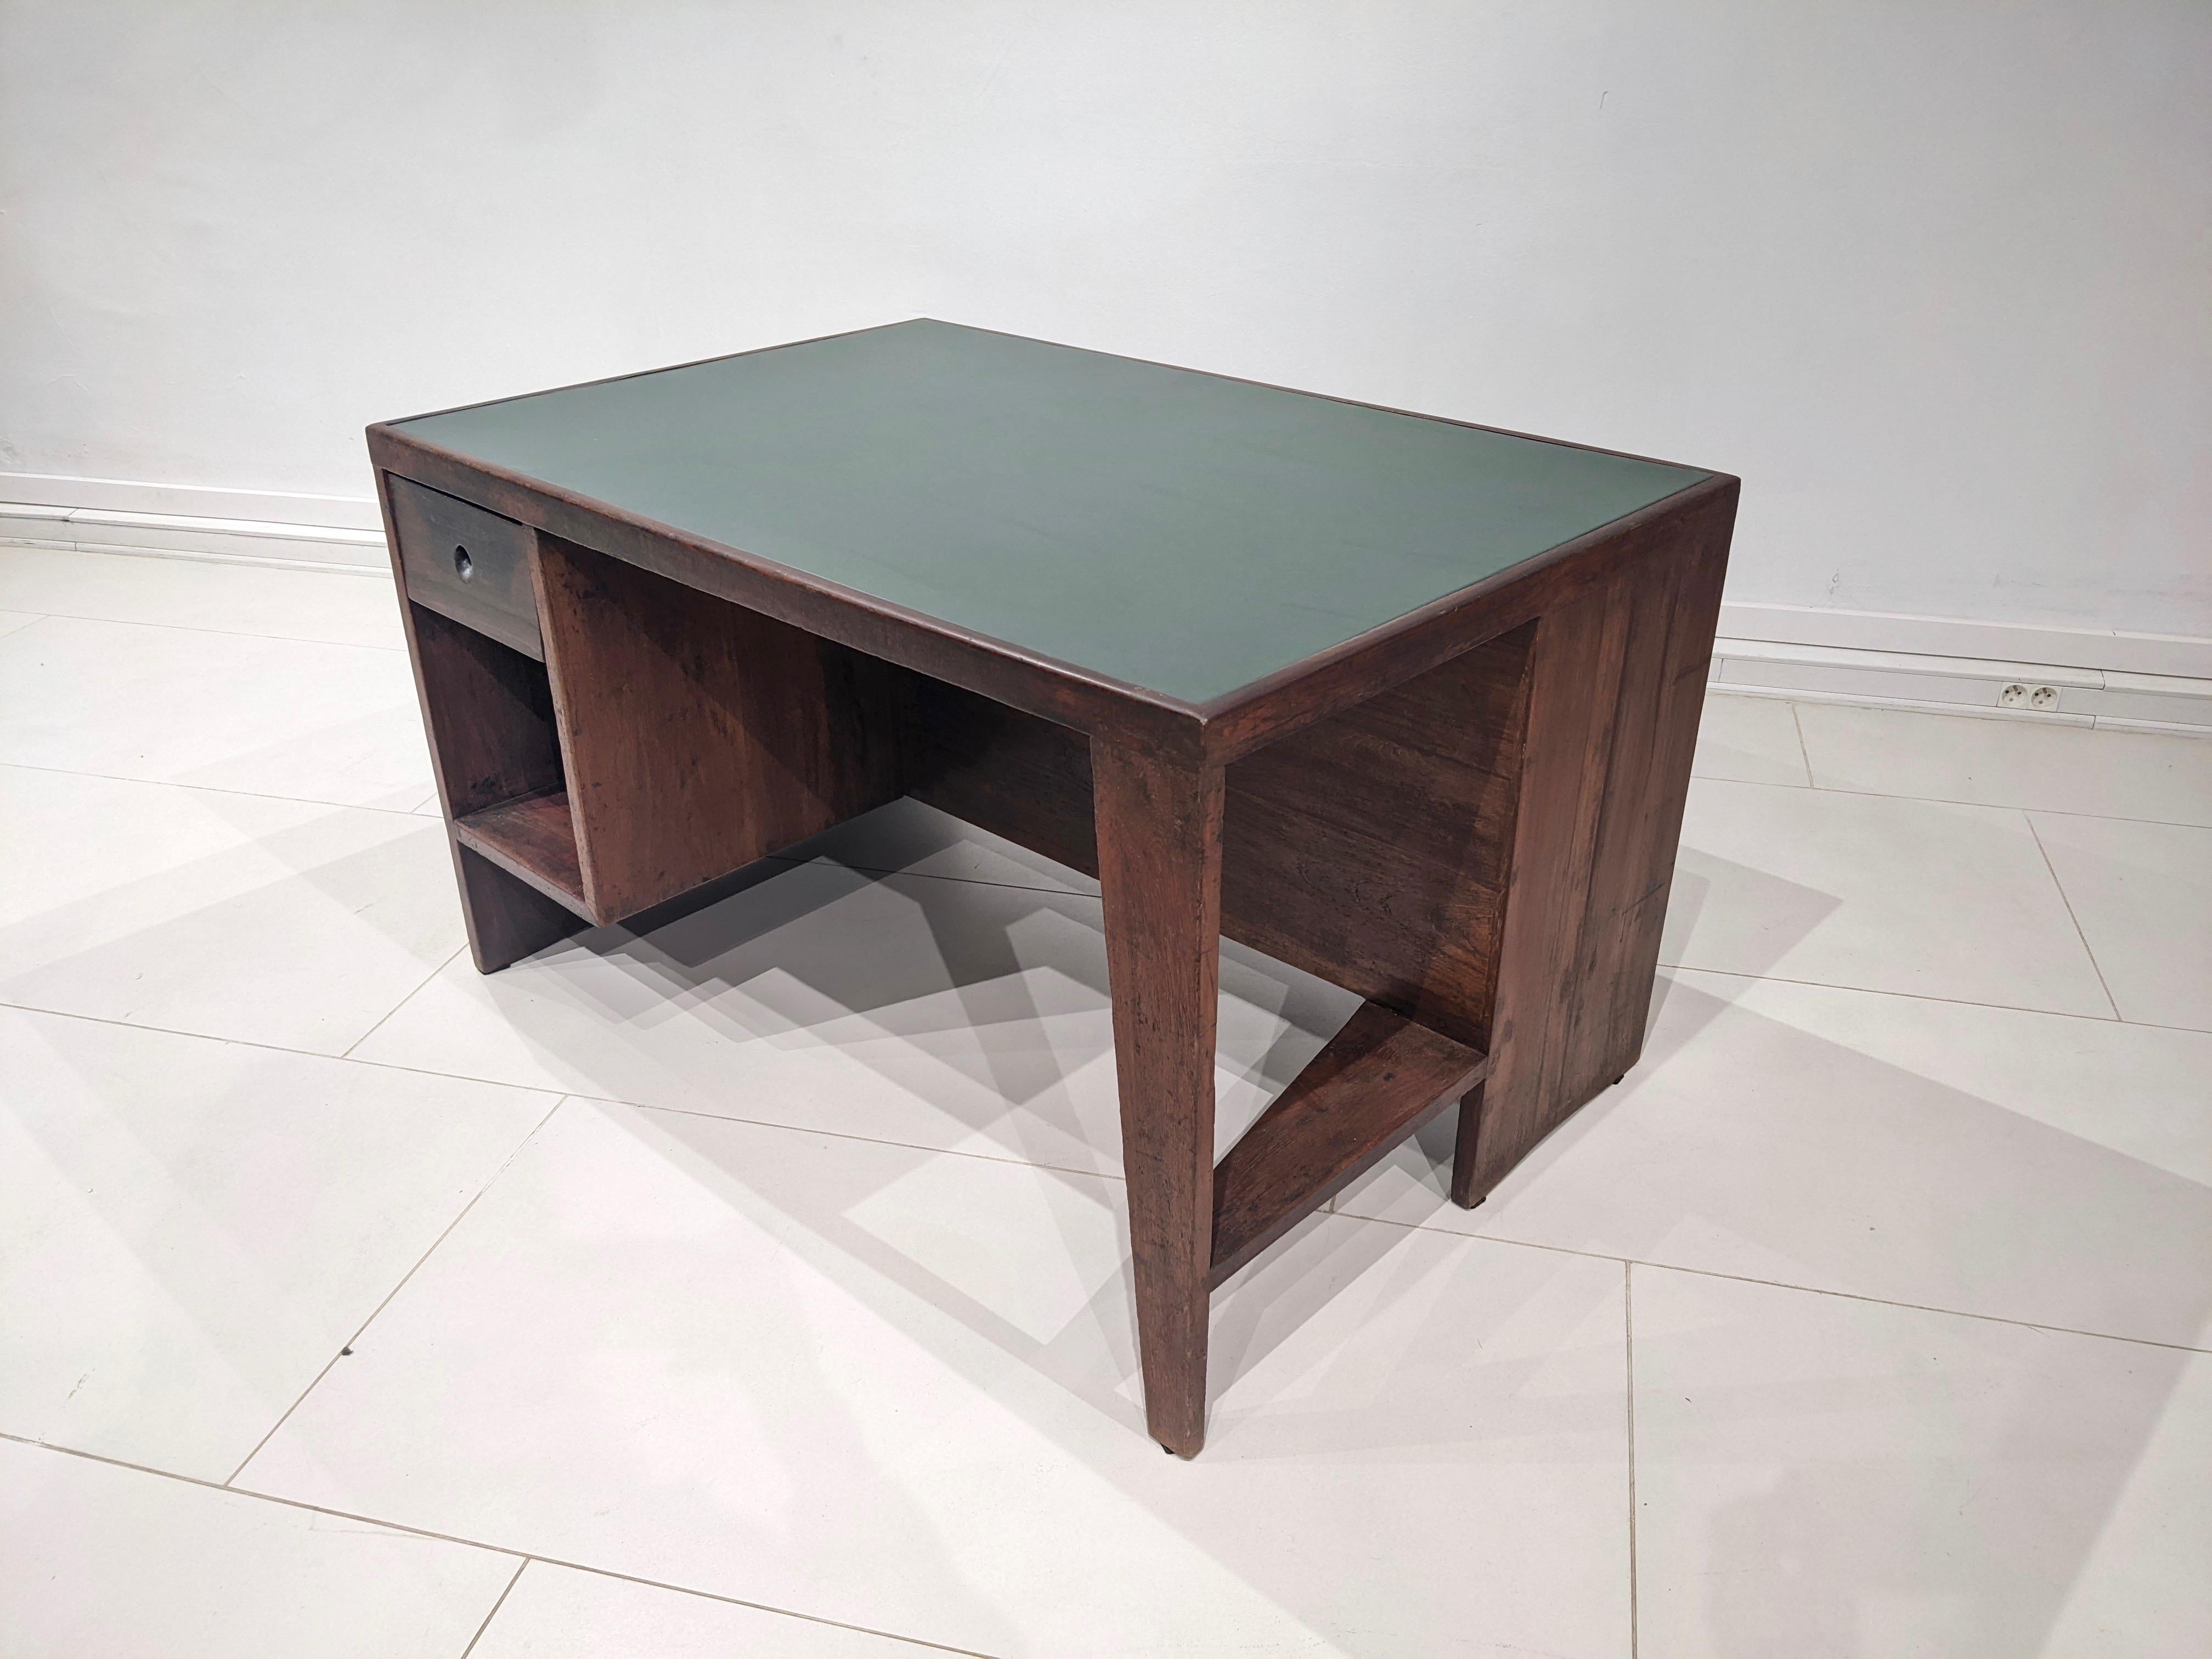 Pigeonhole desk by Jeanneret.
Circa 1957 - 1958. Very good condition. The teak wood has been restored as well as the green leather on the top. 
Designed for the Secretariat, Chandigarh, India.

Dimensions : H 72 cm x W 122 cm x D 84